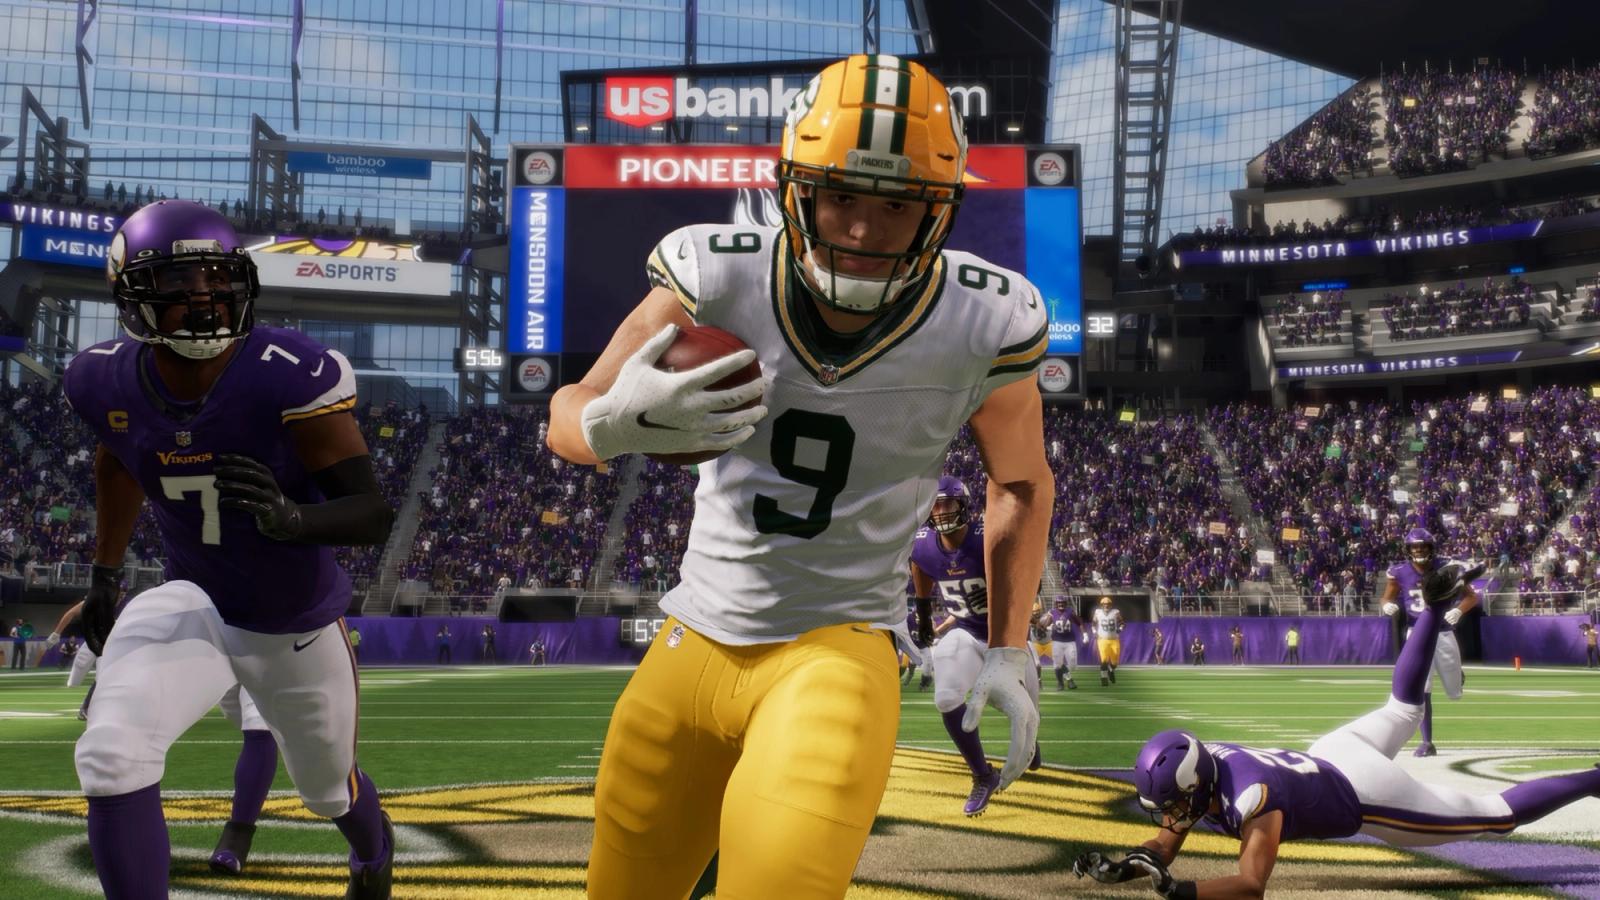 Madden 23 Ratings: Justin Jefferson and Christian Watson receive boost